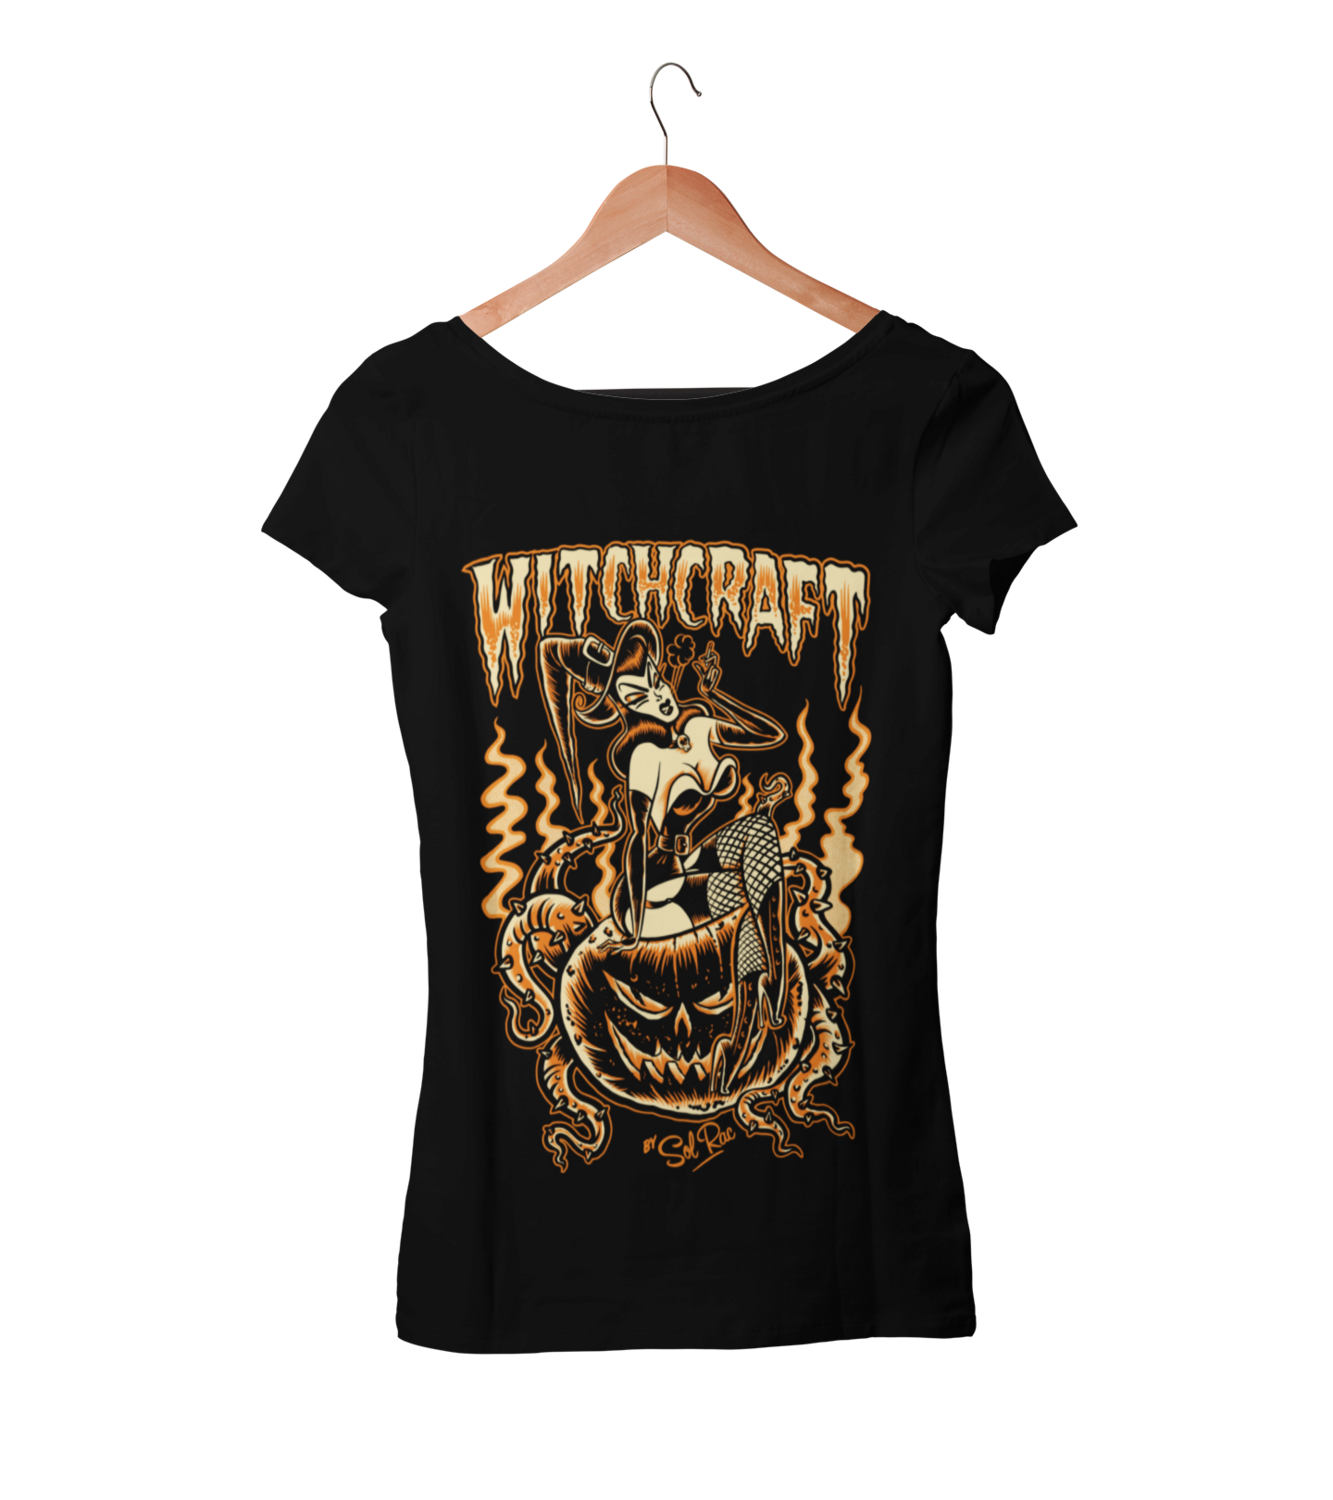 WITCHCRAFT T-SHIRT WOMAN BY SOL RAC